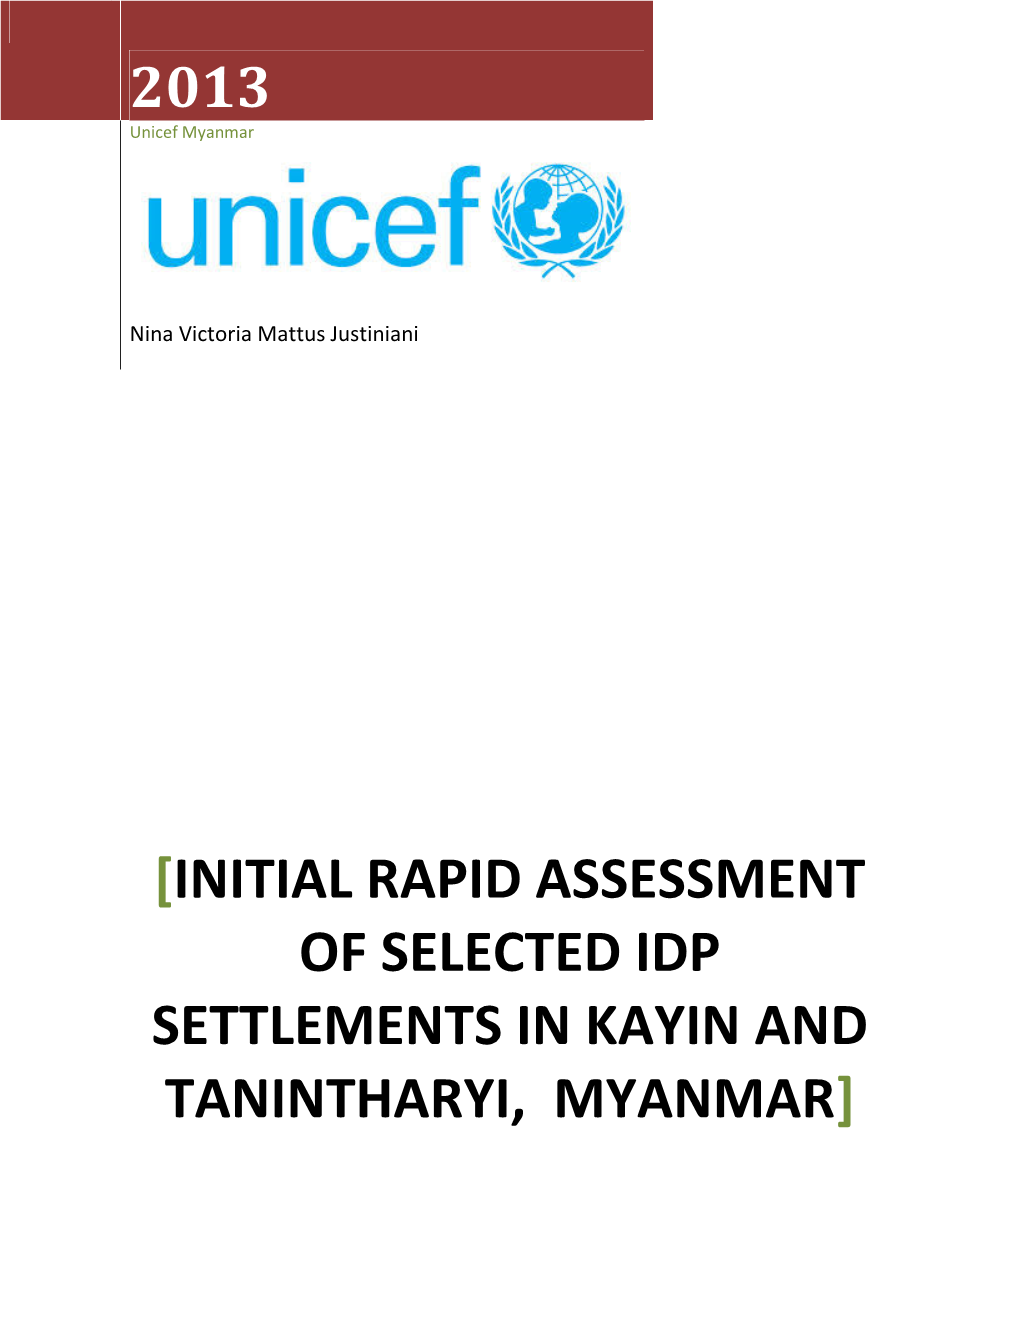 Initial Rapid Assessment of Selected Idp Settlements in Kayin and Tanintharyi, Myanmar